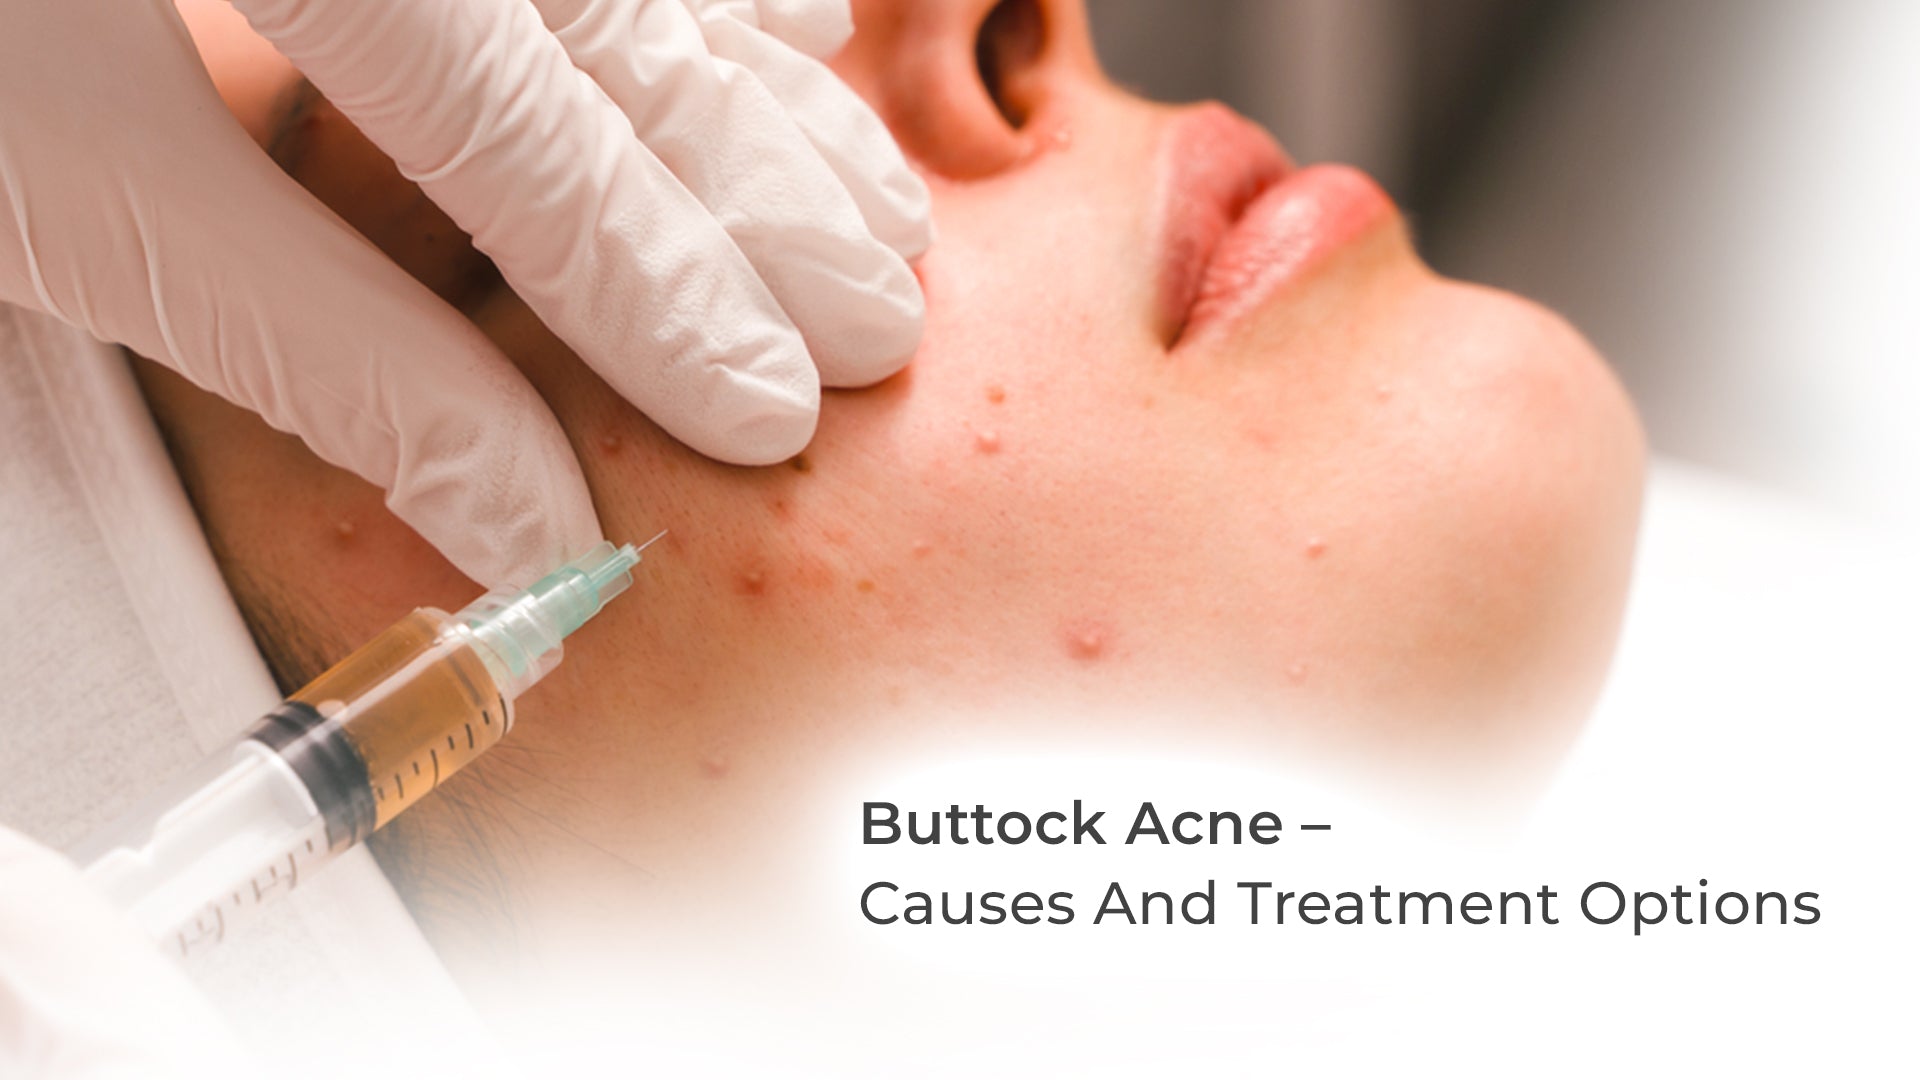 Buttock Acne – Causes And Treatment Options